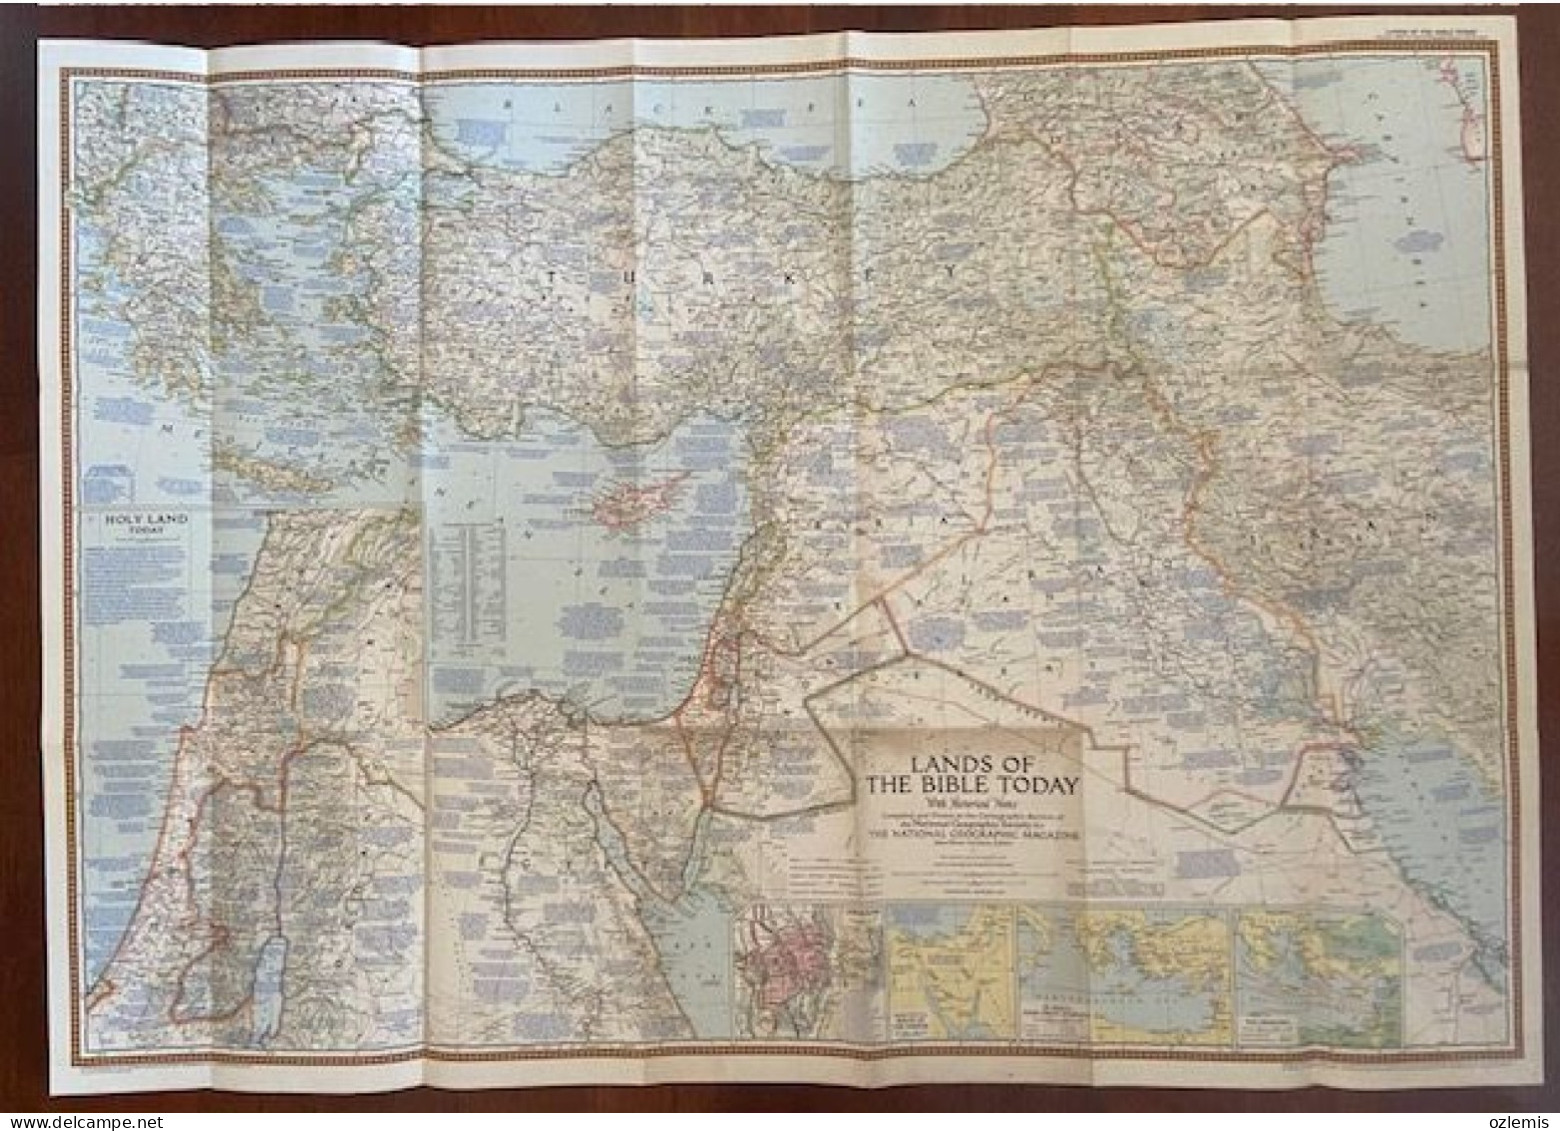 LANDS OF THE BIBLE TODAY WITH HISTORICAL NOTES ,THE NATIONAL GEOGRAPHIC MAGAZINE ,1956 ,MAP - Atlases, Maps